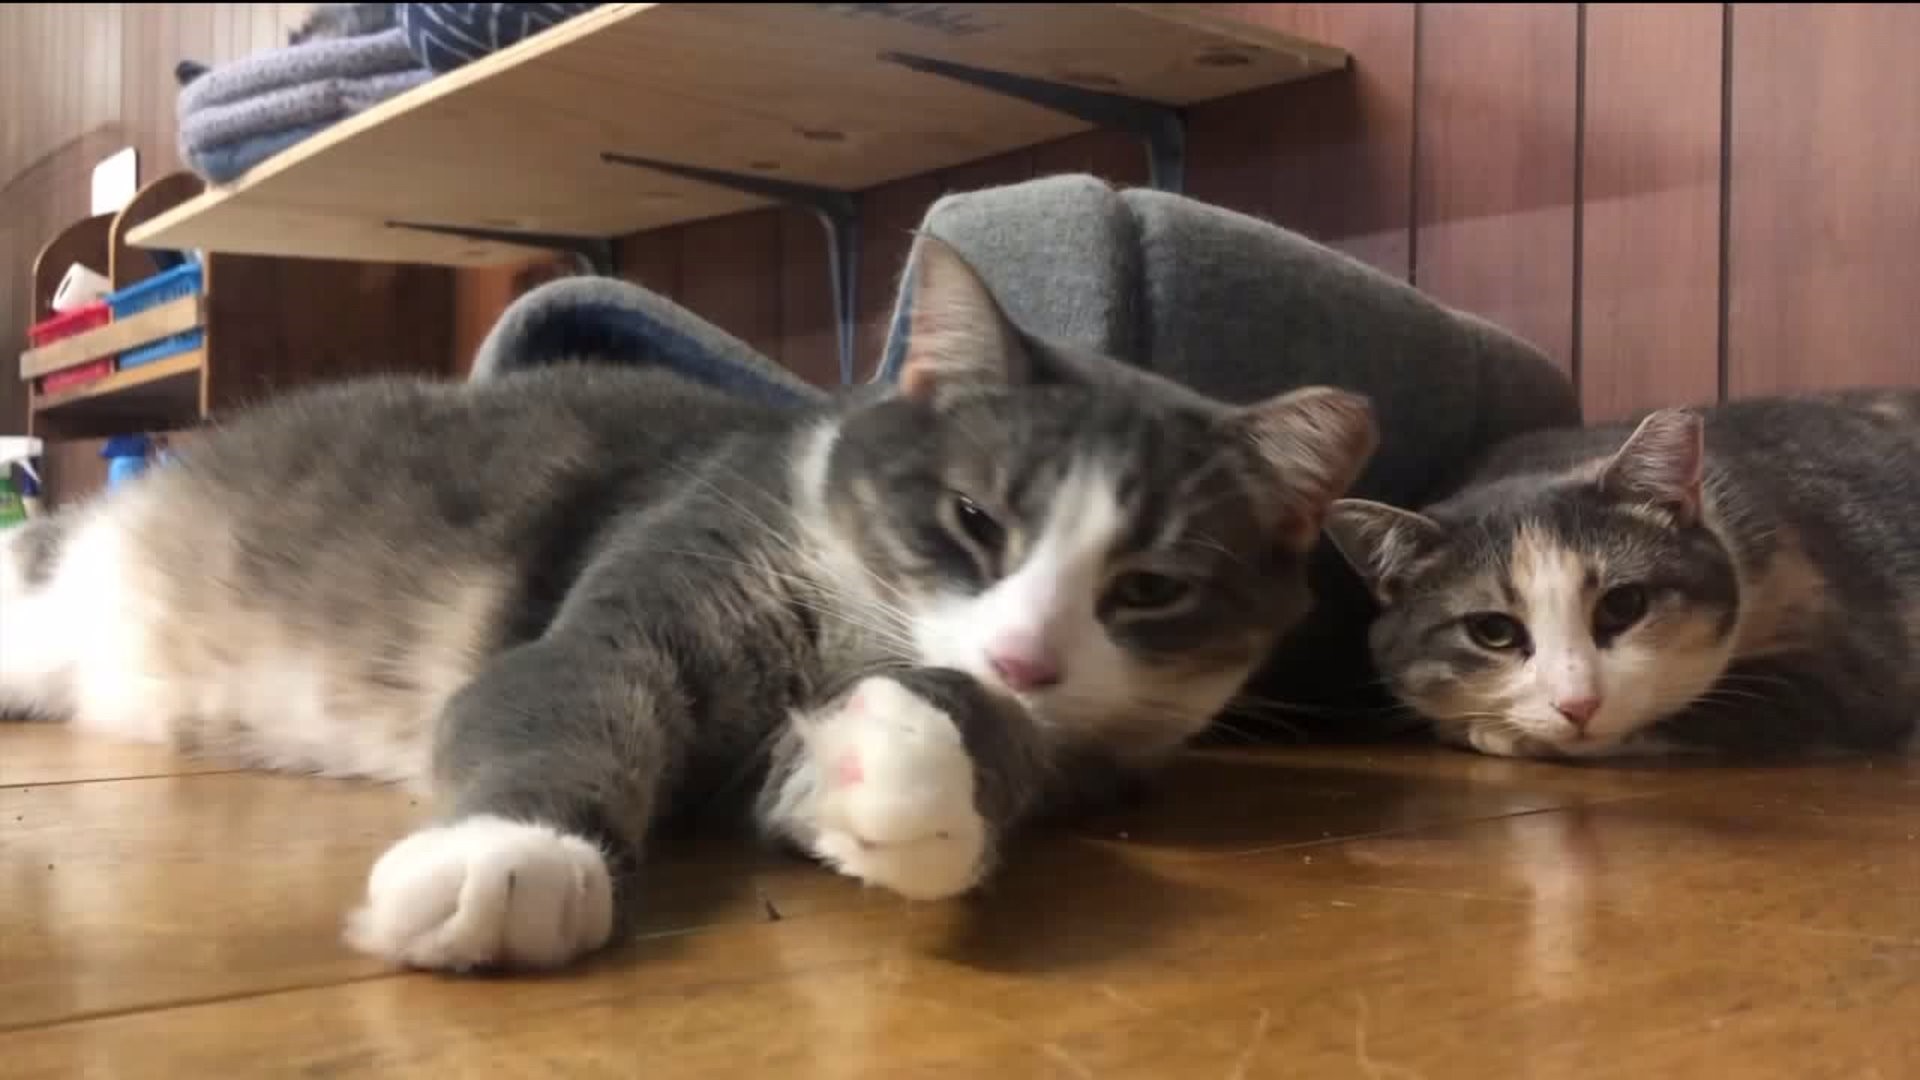 Rescued Cats Up for Adoption as Animal Rescue Seeks Help 